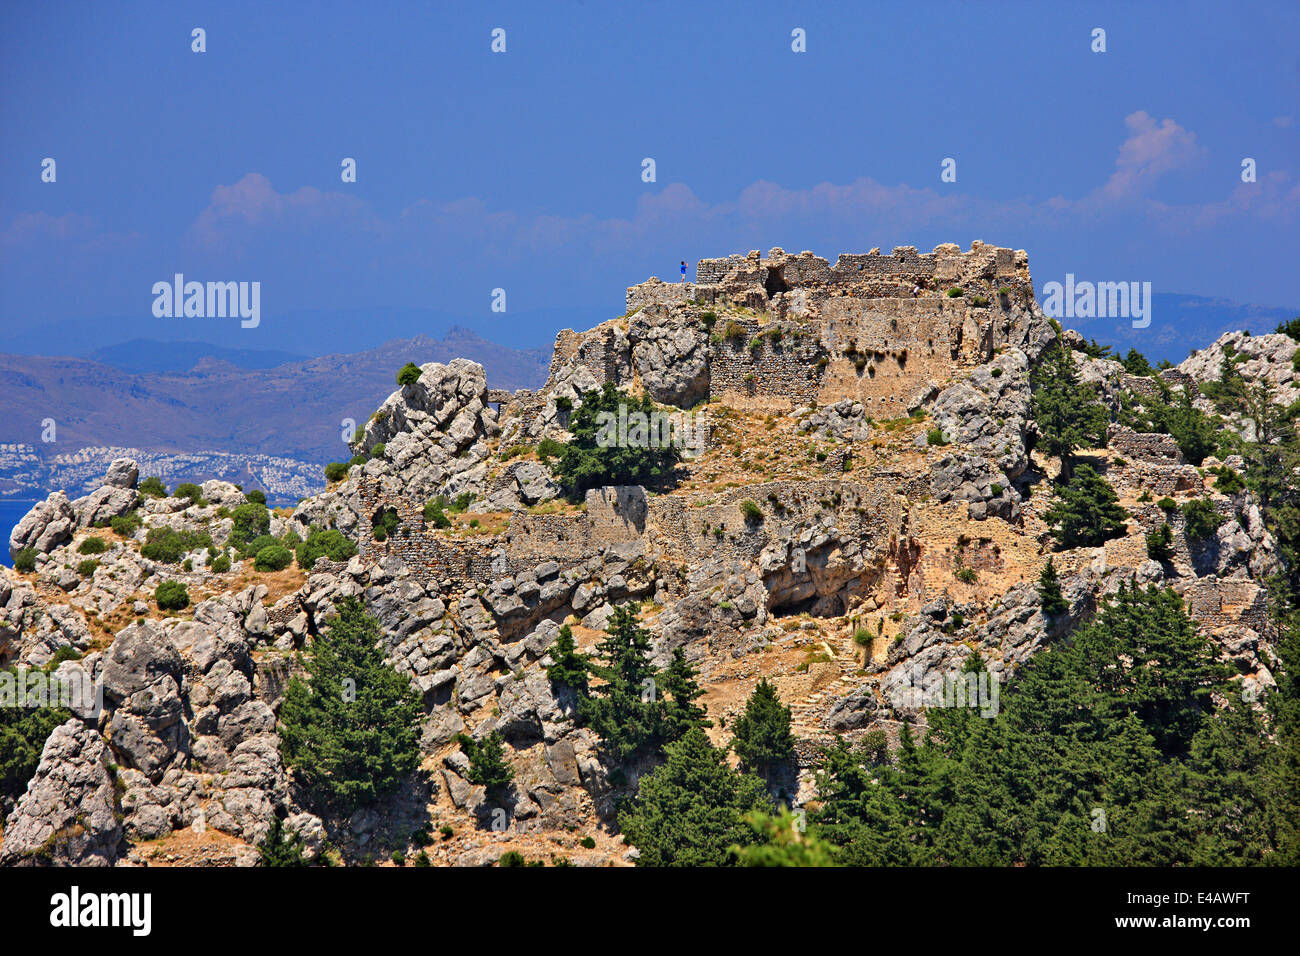 The Castle of Pyli overlooking the strait between Kos island and the Turkish coast (in the background). Dodecanese, Greece. Stock Photo